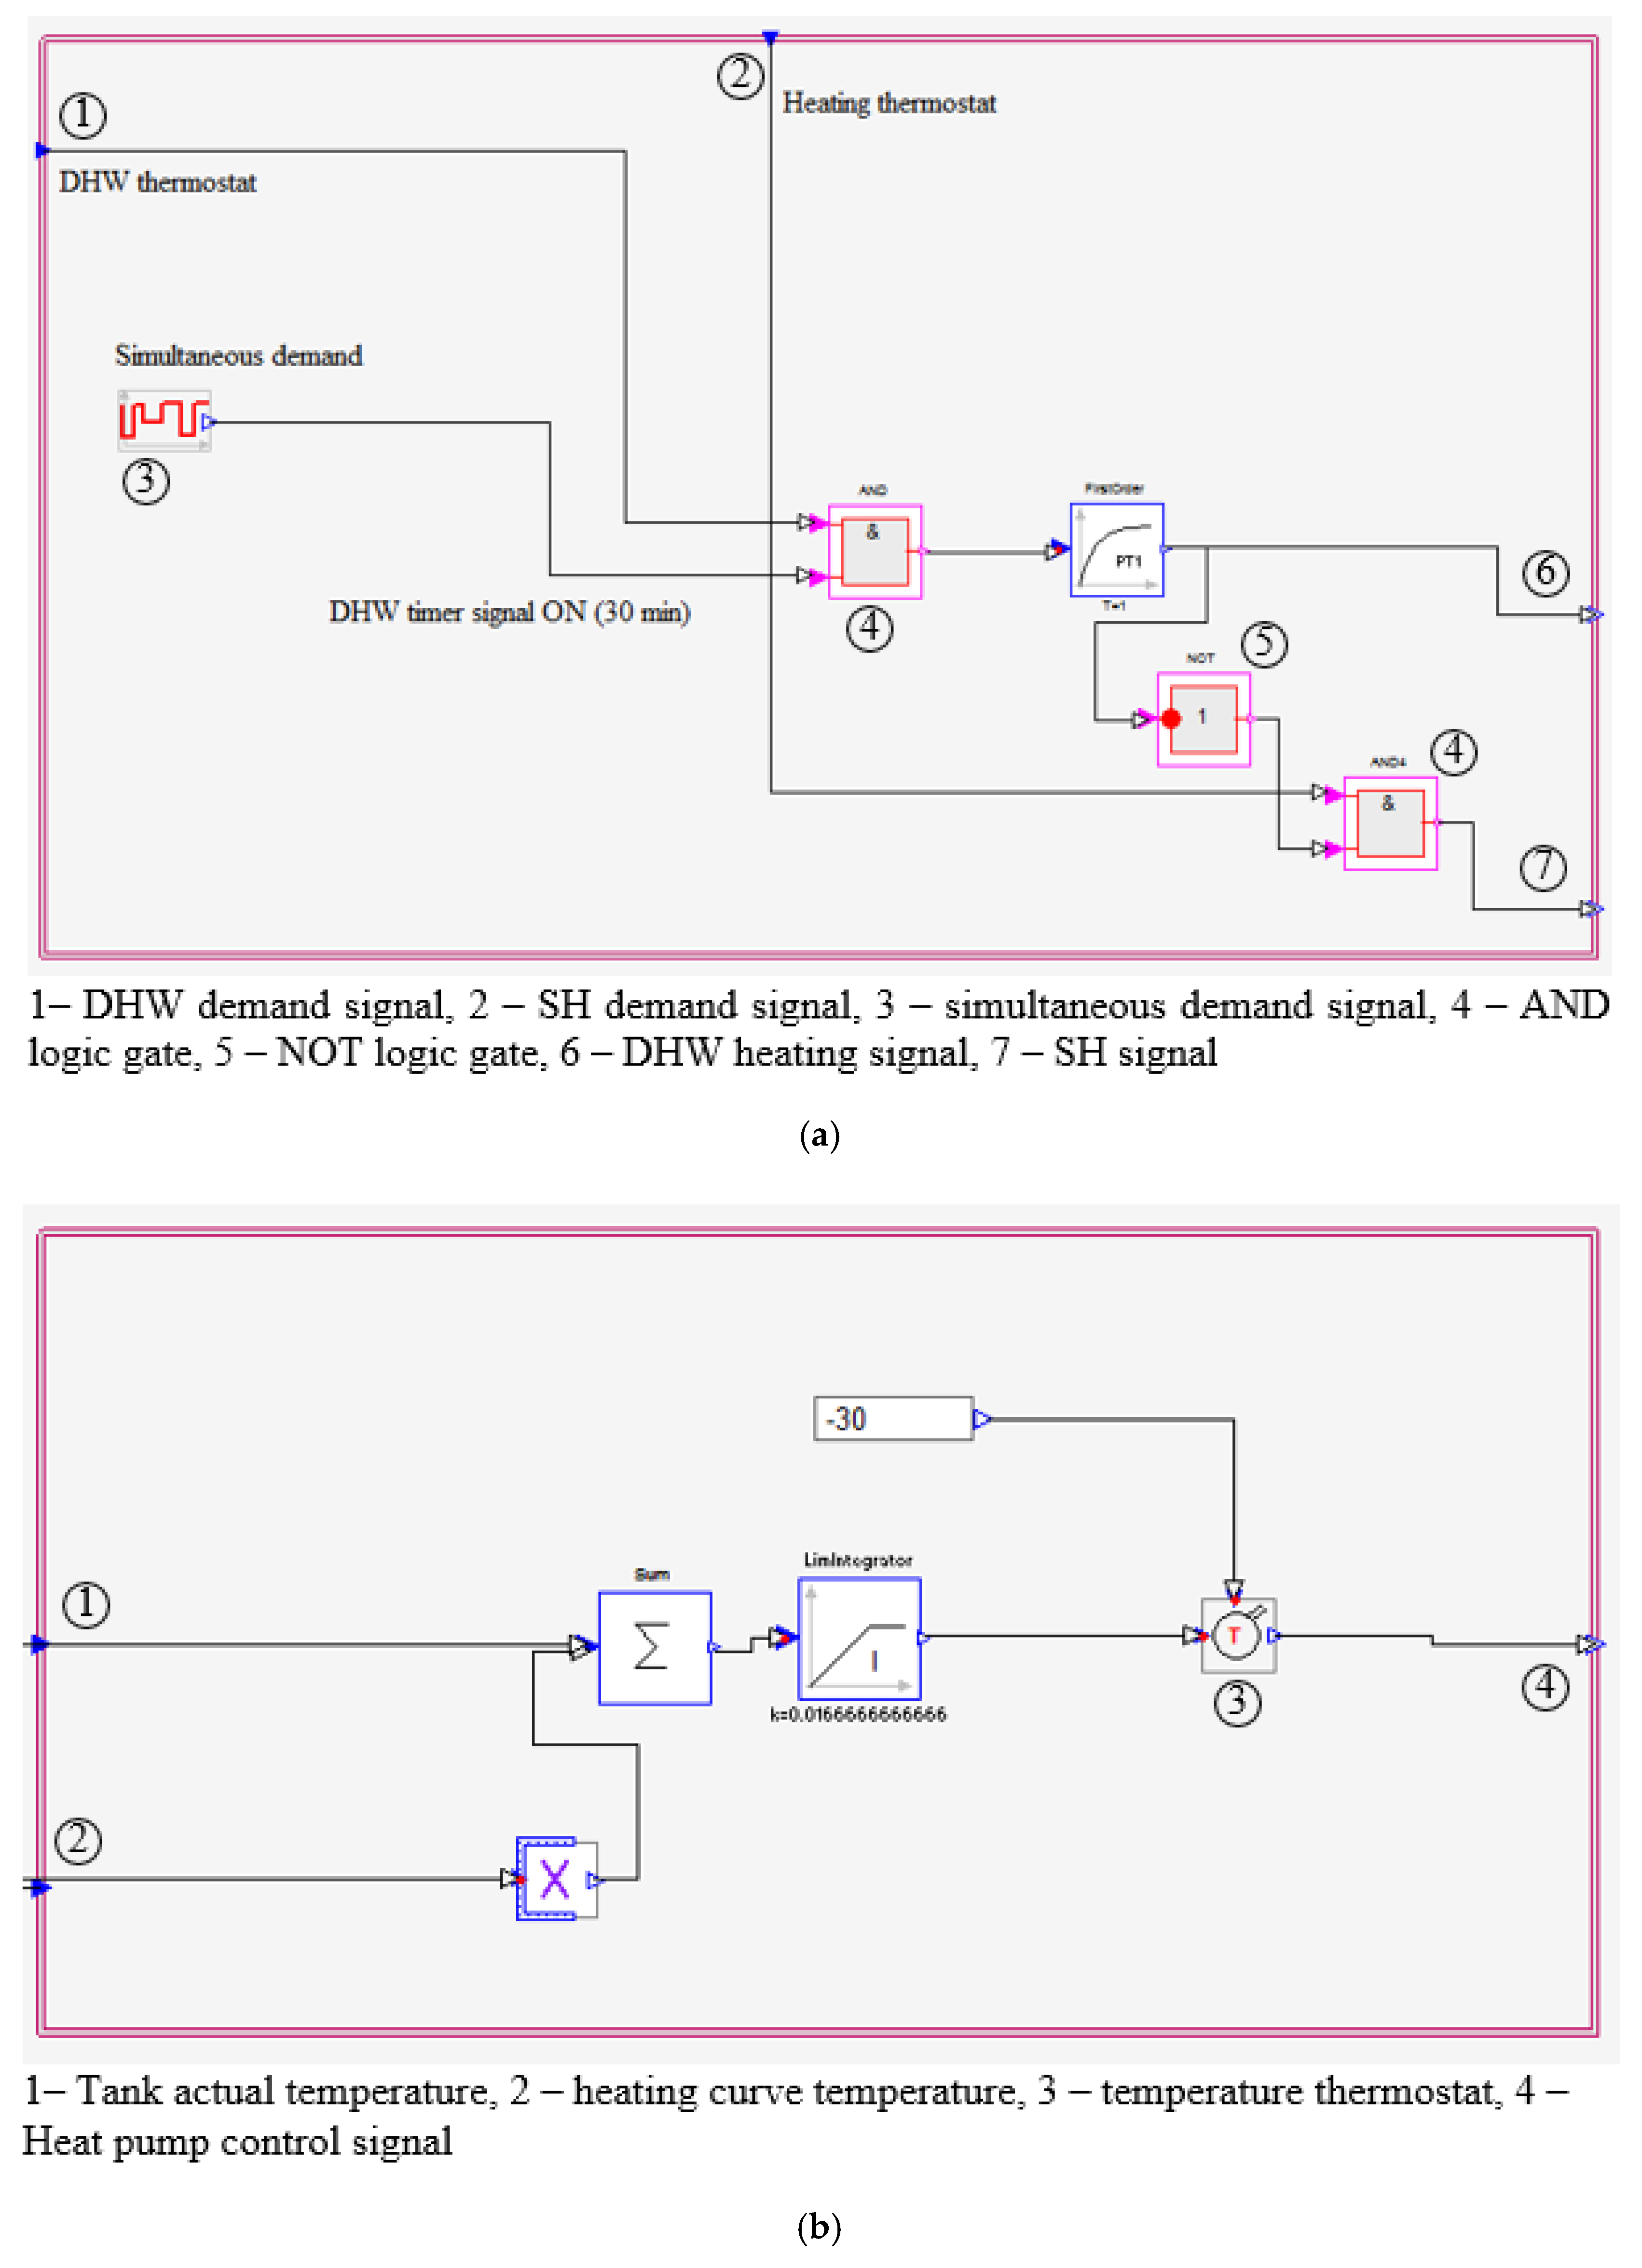 Air Ease Heat Pump Thermostat Wiring Diagram - Wiring Diagram Networks